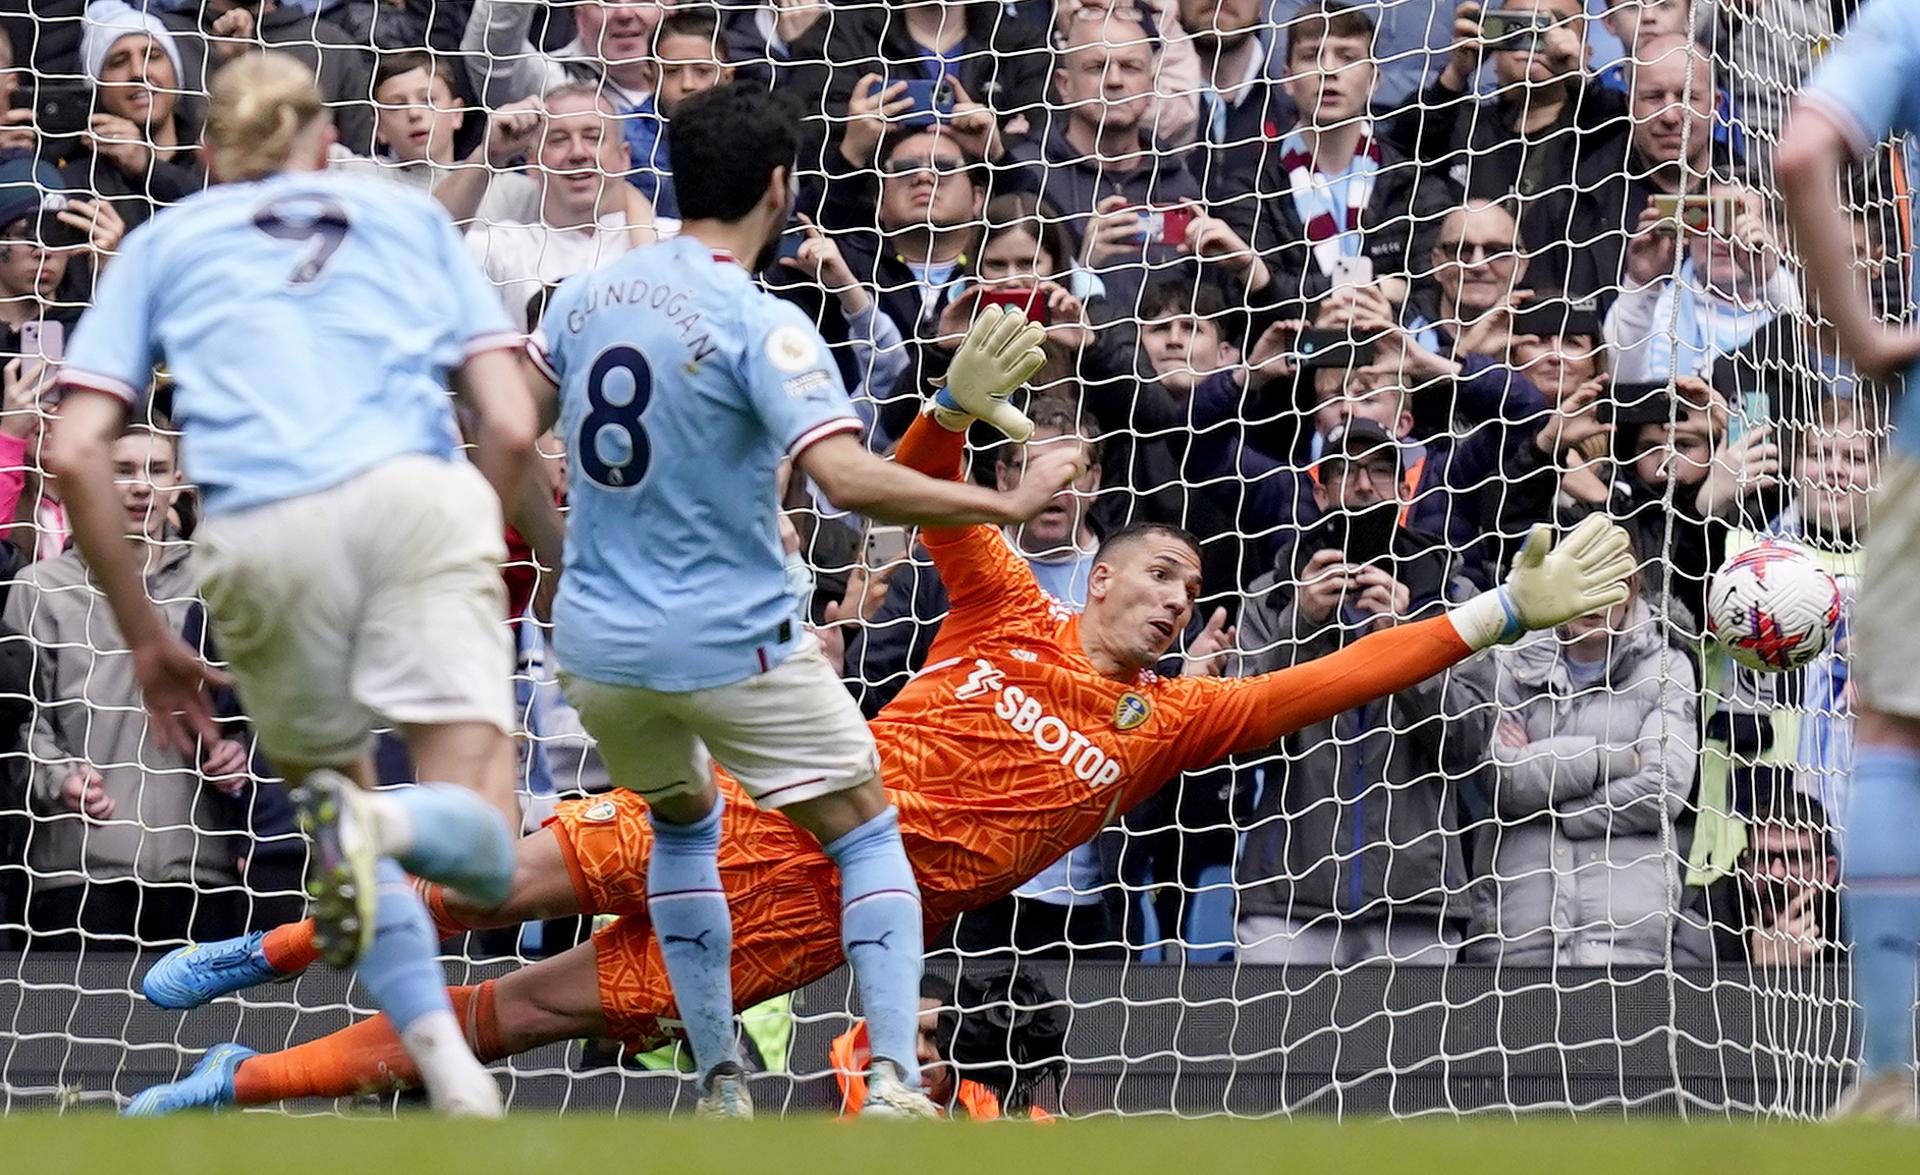 Leeds United goalkeeper Joel Robles saves a penalty by Ilkay Gündogan of Manchester City during a Premier League match in Manchester, England, on 6 May 2023. EFE/EPA/TIM KEETON EDITORIAL USE ONLY. No use with unauthorized audio, video, data, fixture lists, club/league logos or 'live' services. Online in-match use limited to 120 images, no video emulation. No use in betting, games or single club/league/player publications.